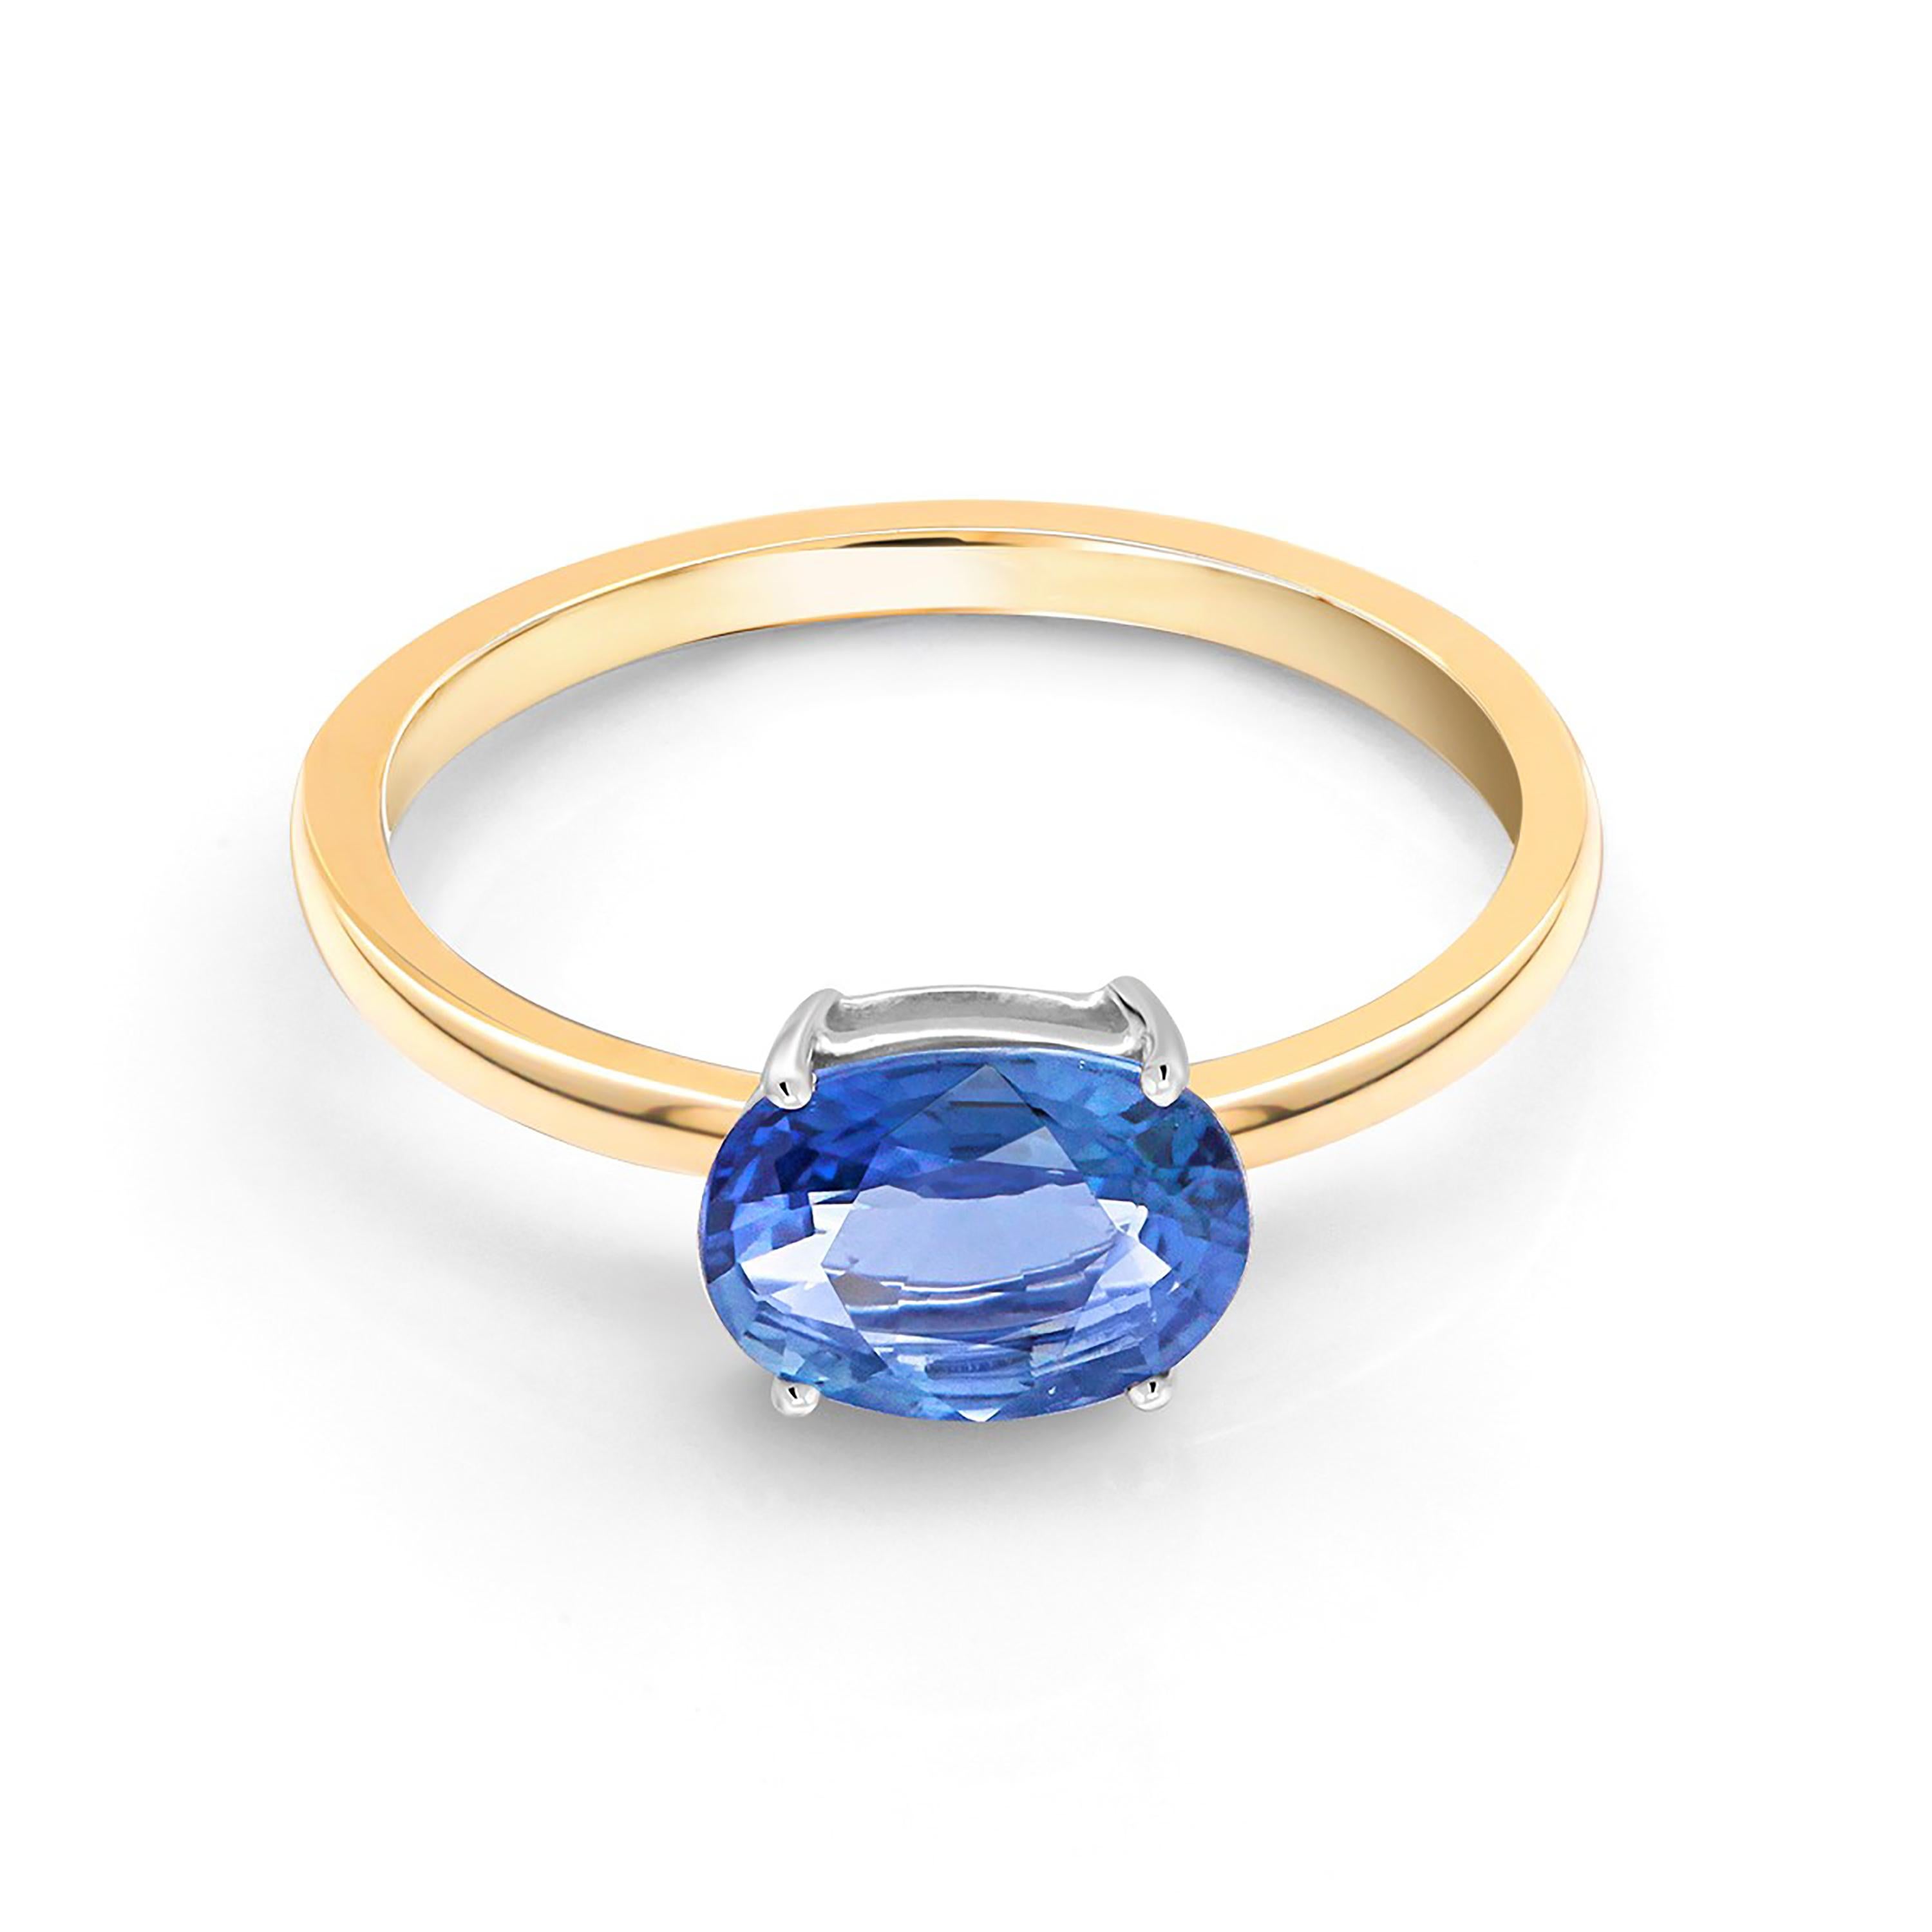 Fourteen karats white and yellow gold solitaire cocktail or stacking ring
Bright Ceylon oval-shaped blue sapphire weighing 1.40 carats                                                                       
Ring size 7 In Stock
The ring can be